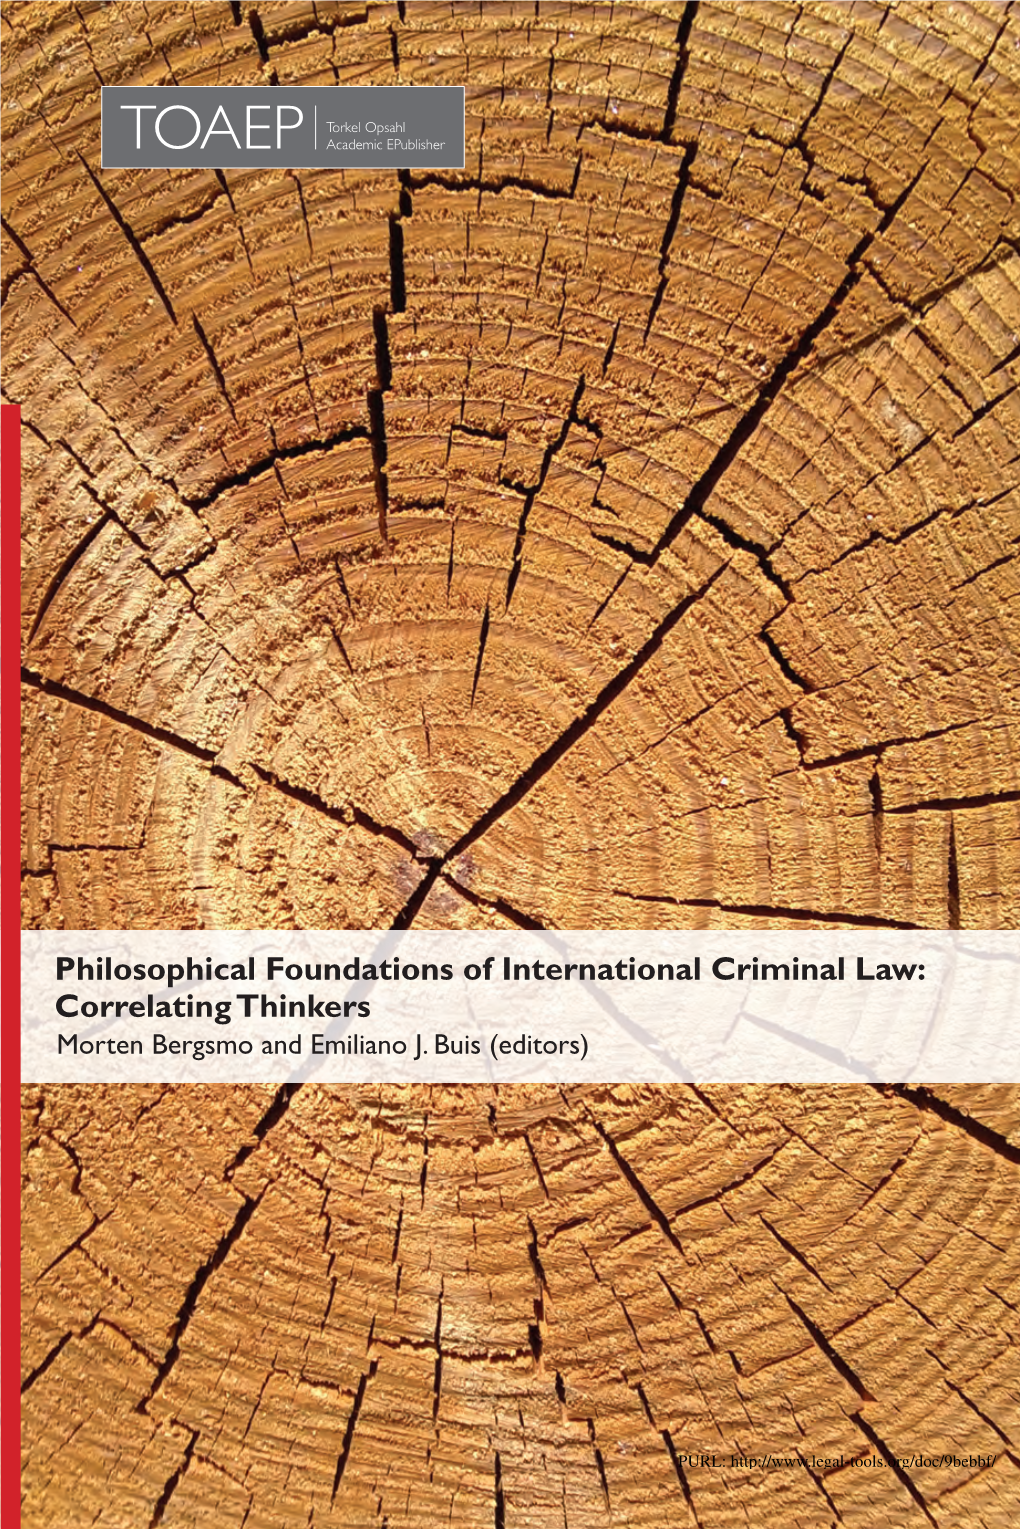 Punishment and Universal Jurisdiction in Emer De Vattel's Law of Nations